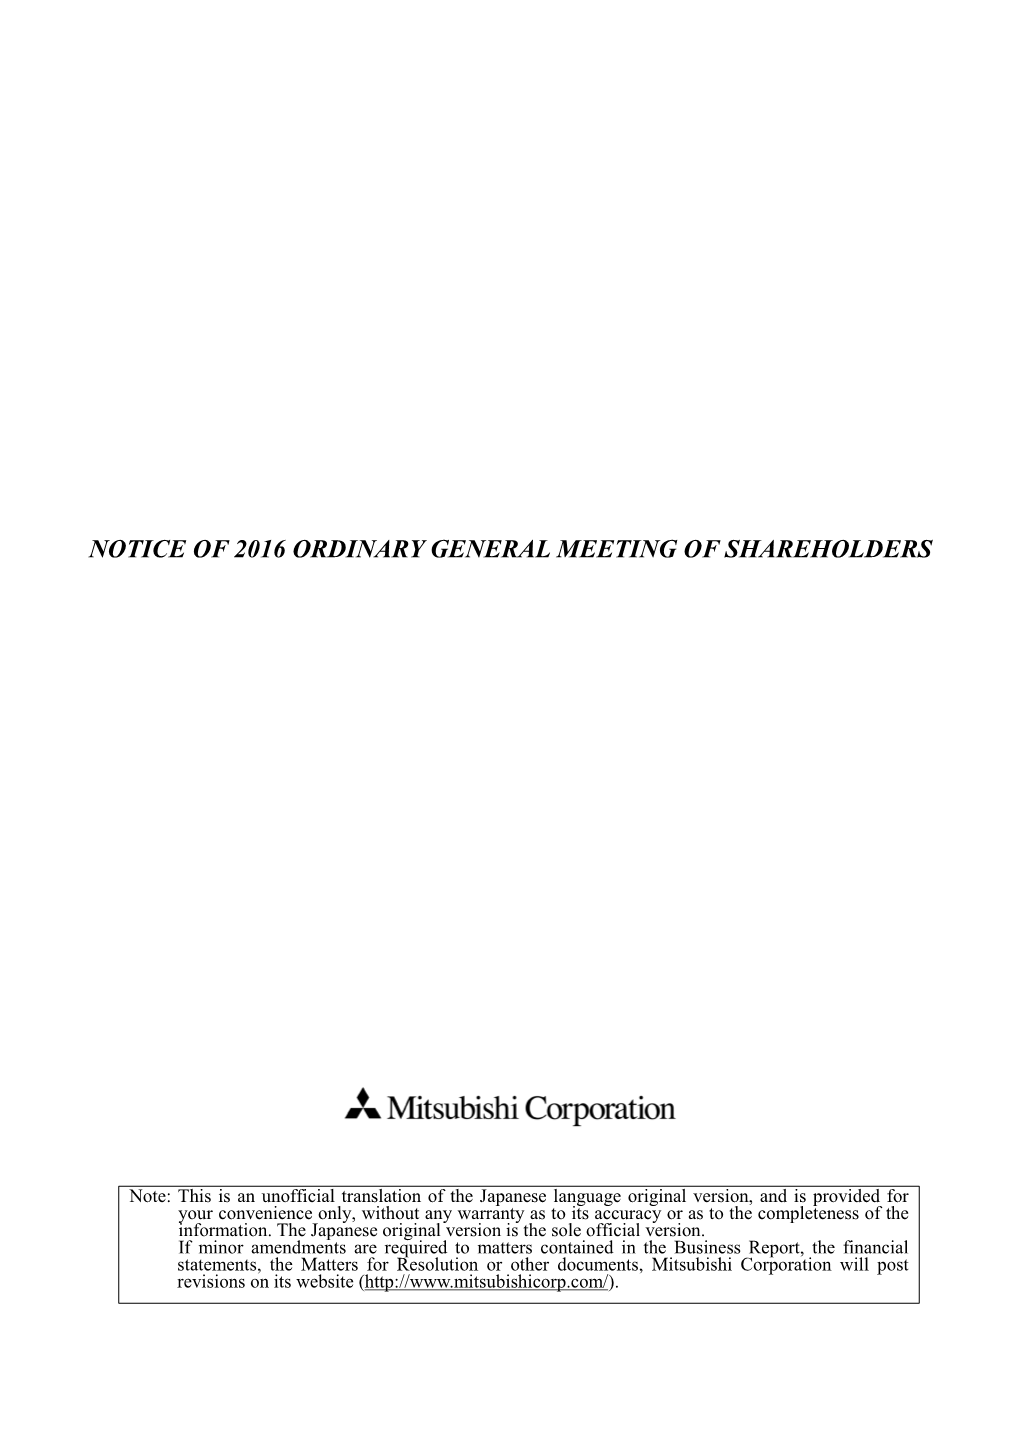 Notice of 2016 Ordinary General Meeting of Shareholders